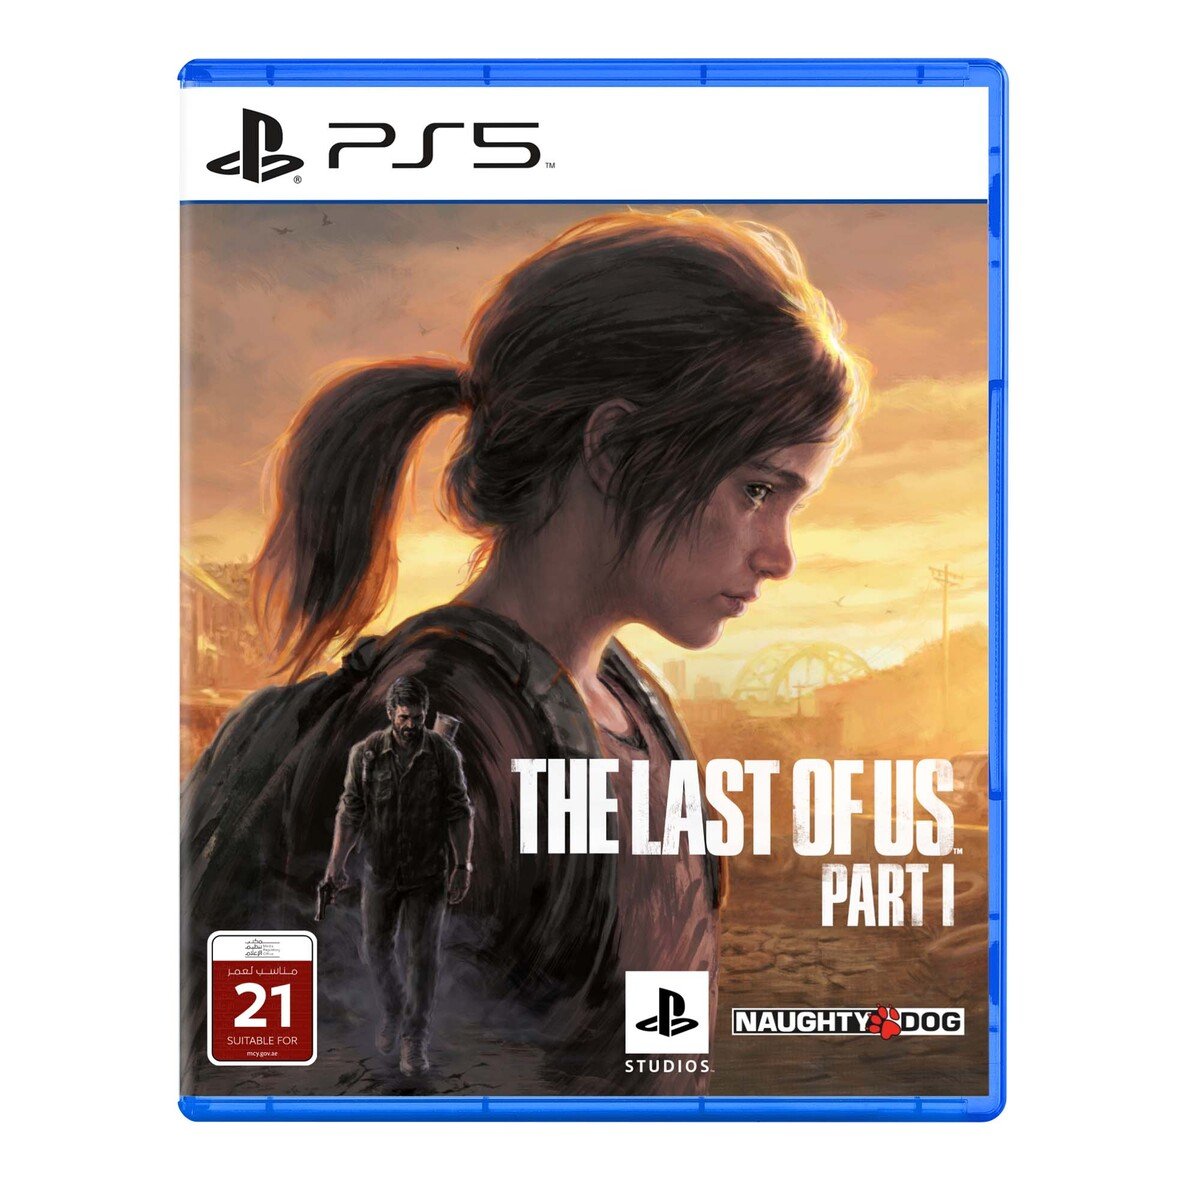 The Last of Us Part I Standard Edition